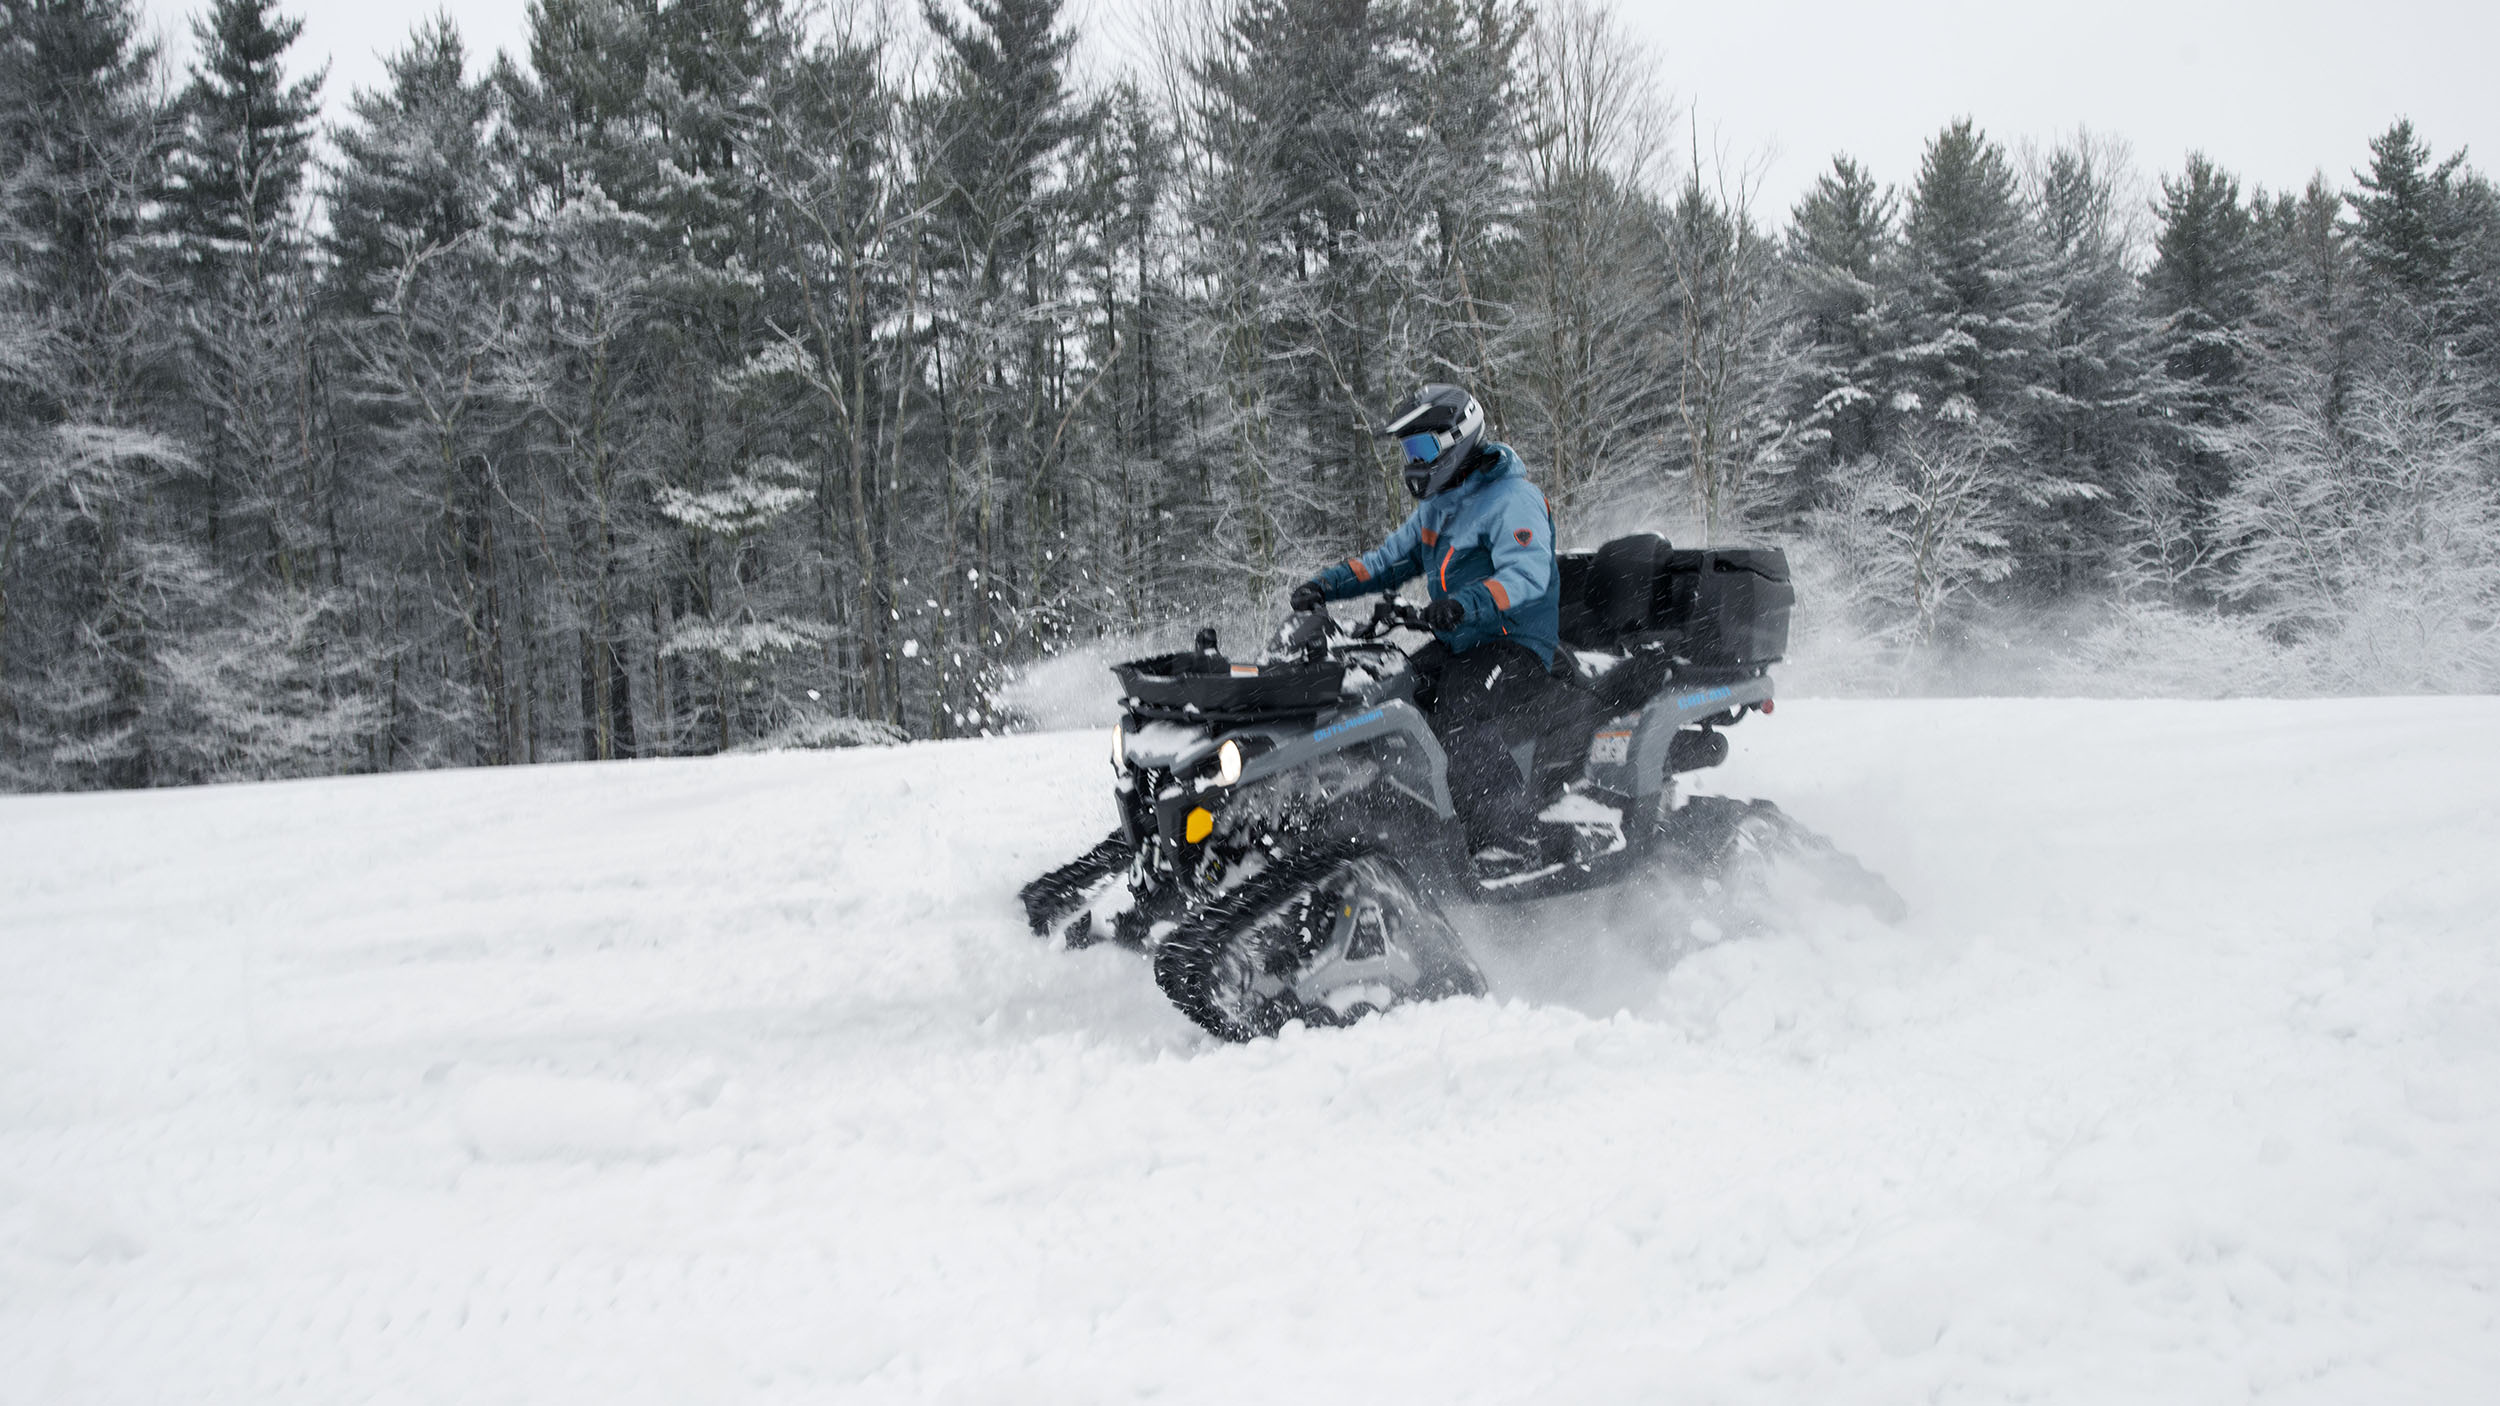 A Can-Am rider speeding by in the snow